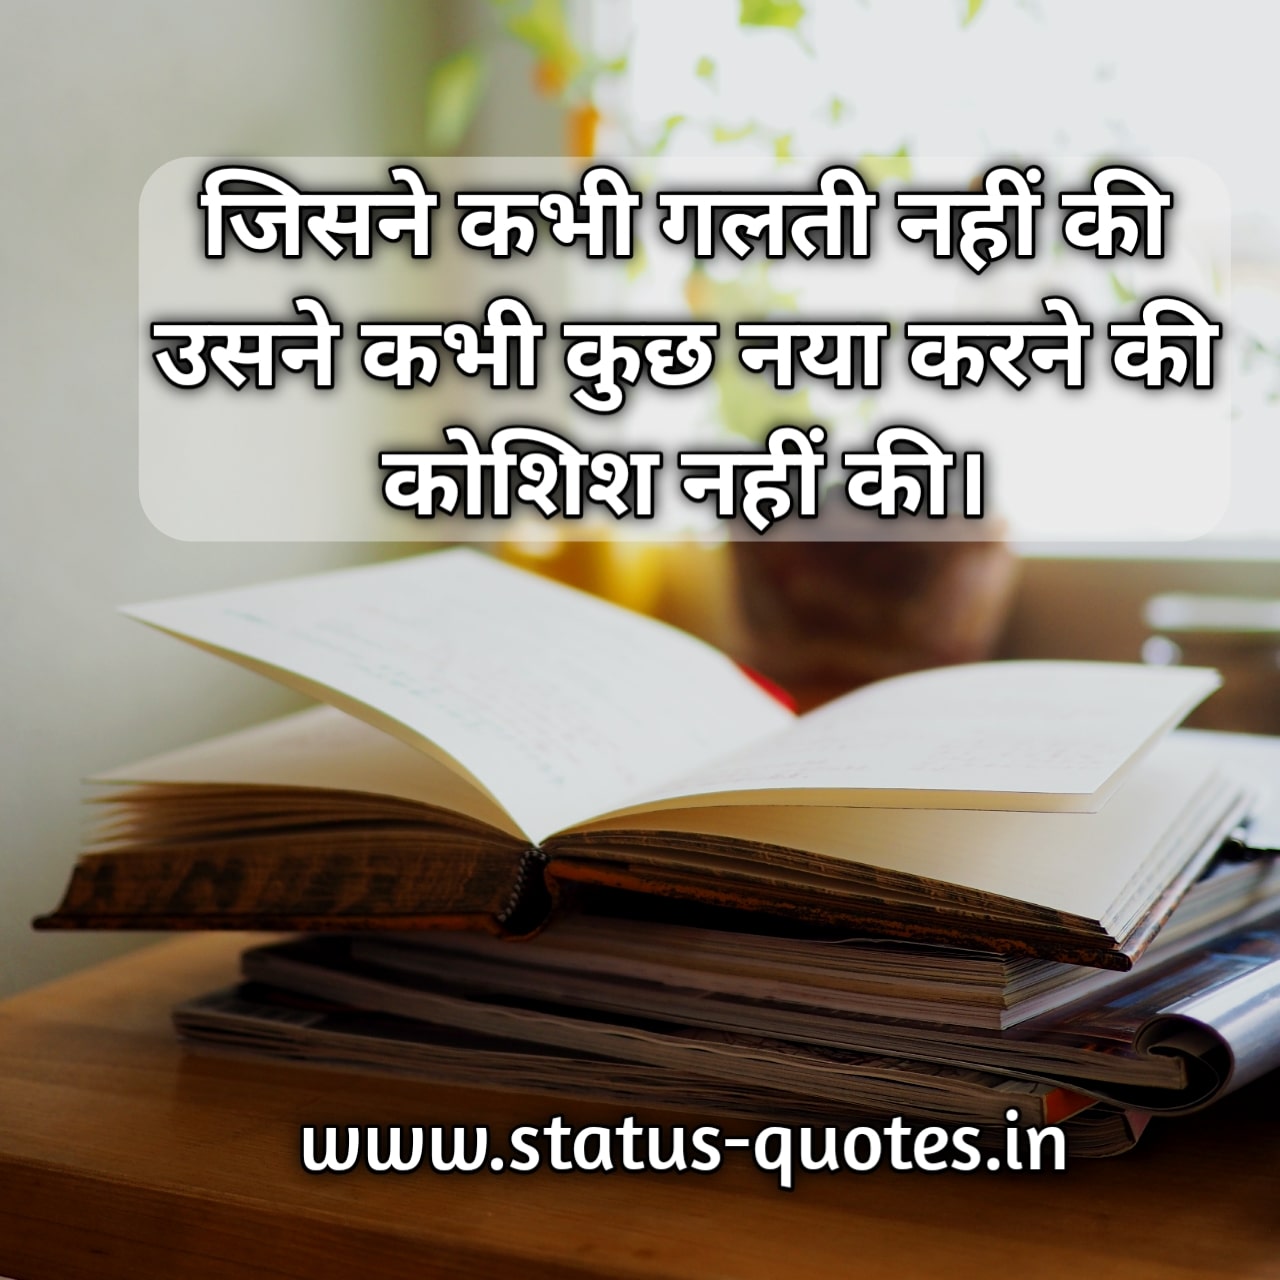 67+ Best Motivational Quotes For Students In Hindi Images 2021